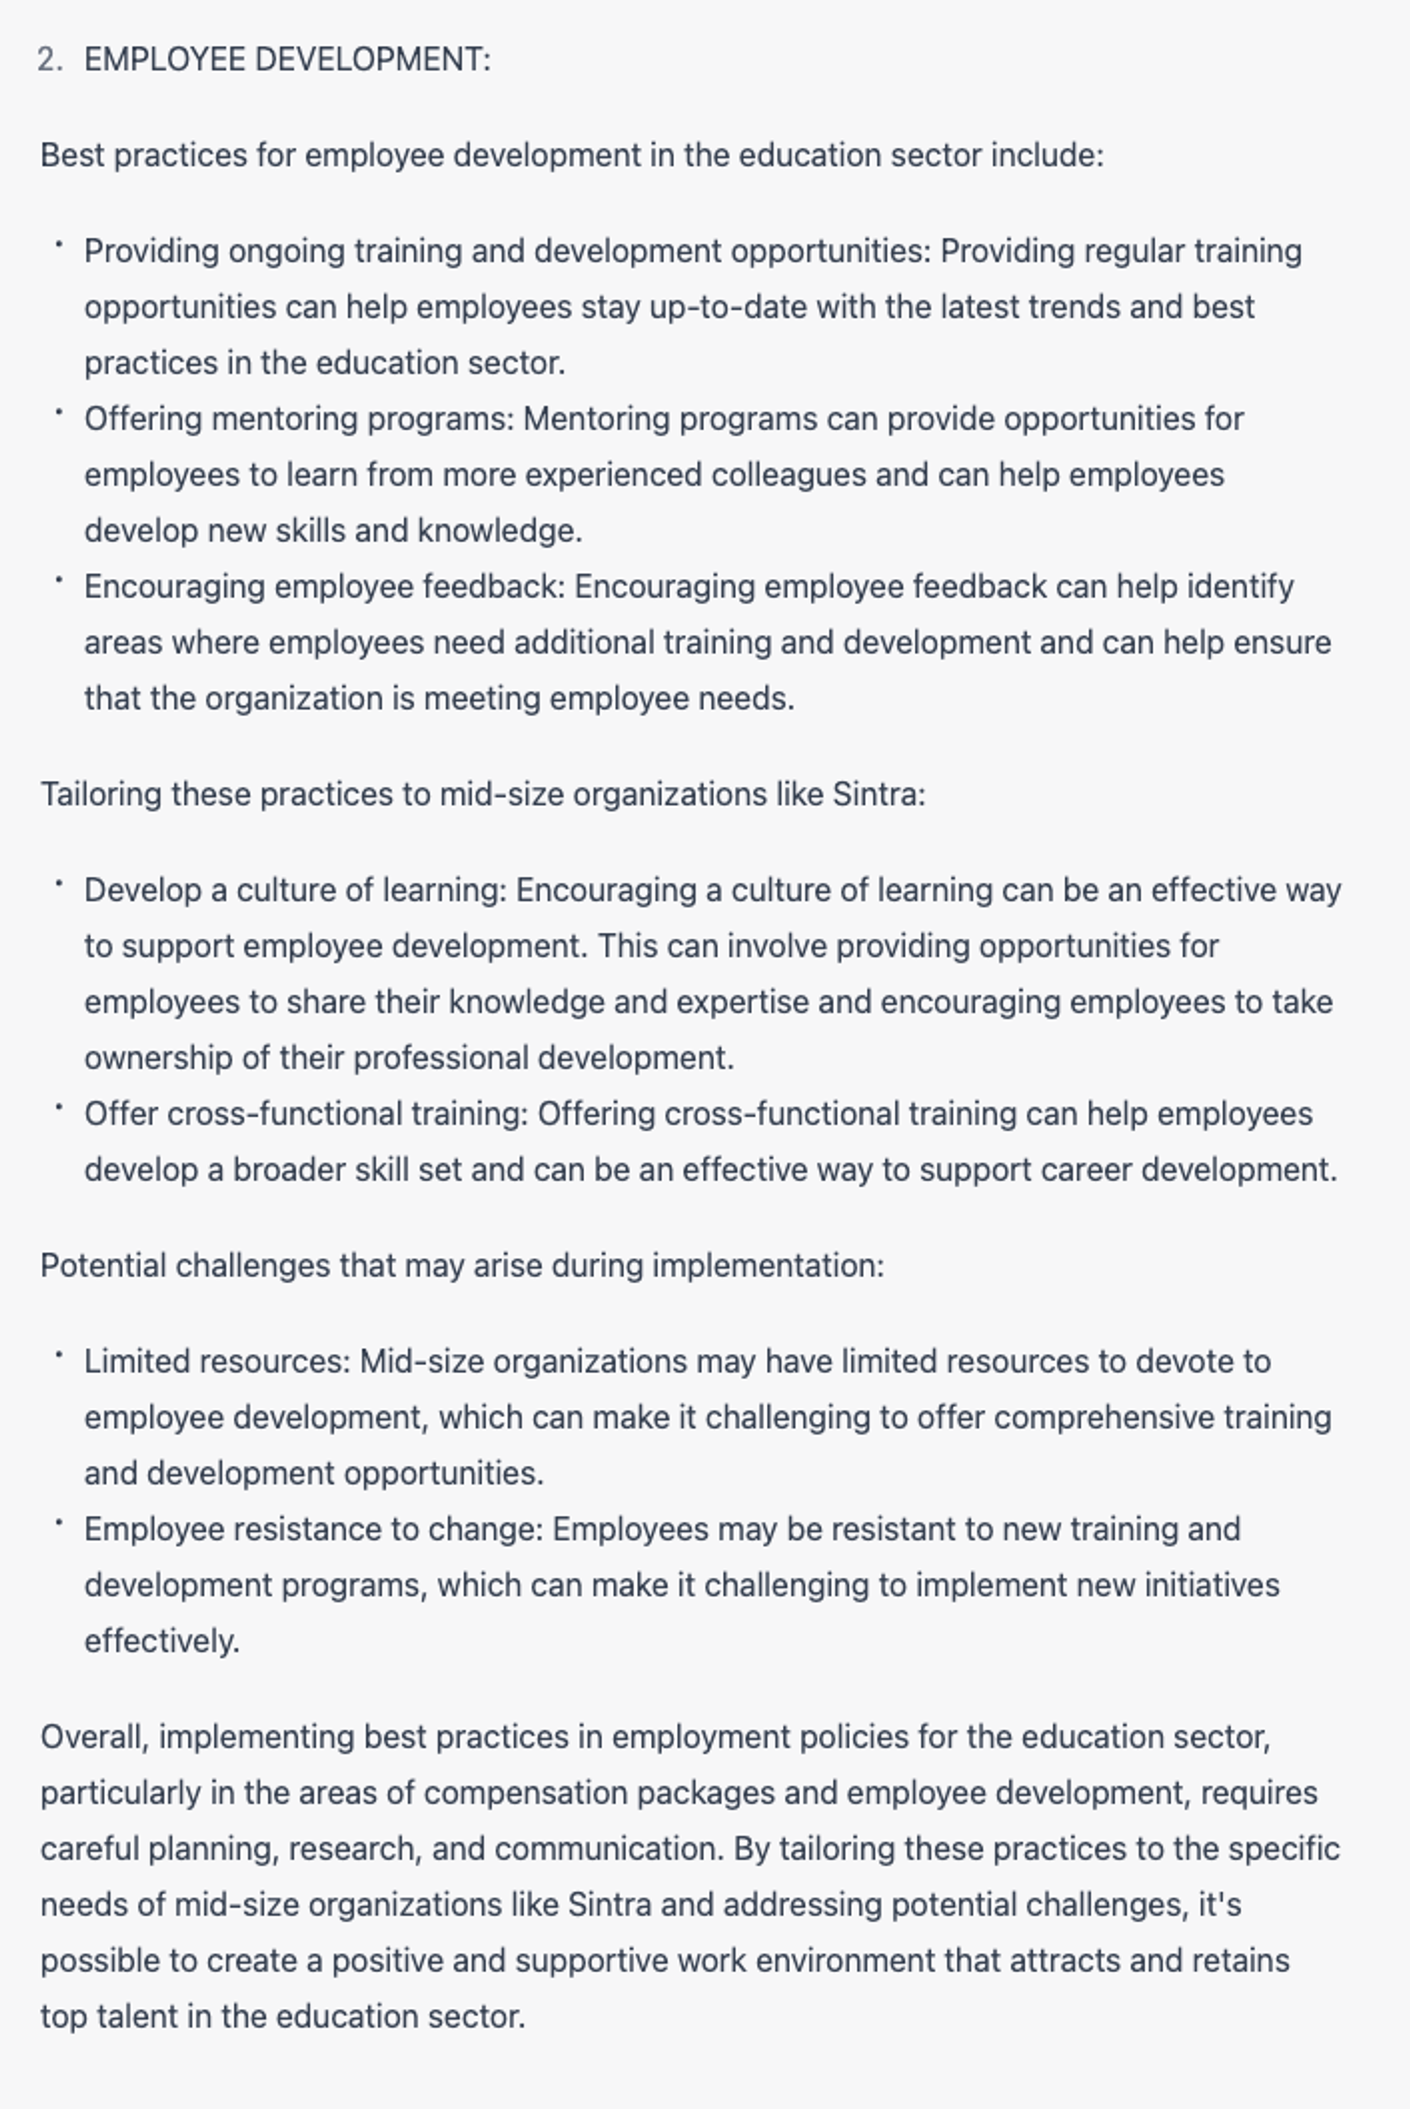  7 Advanced ChatGPT Prompts: Developing employment policies